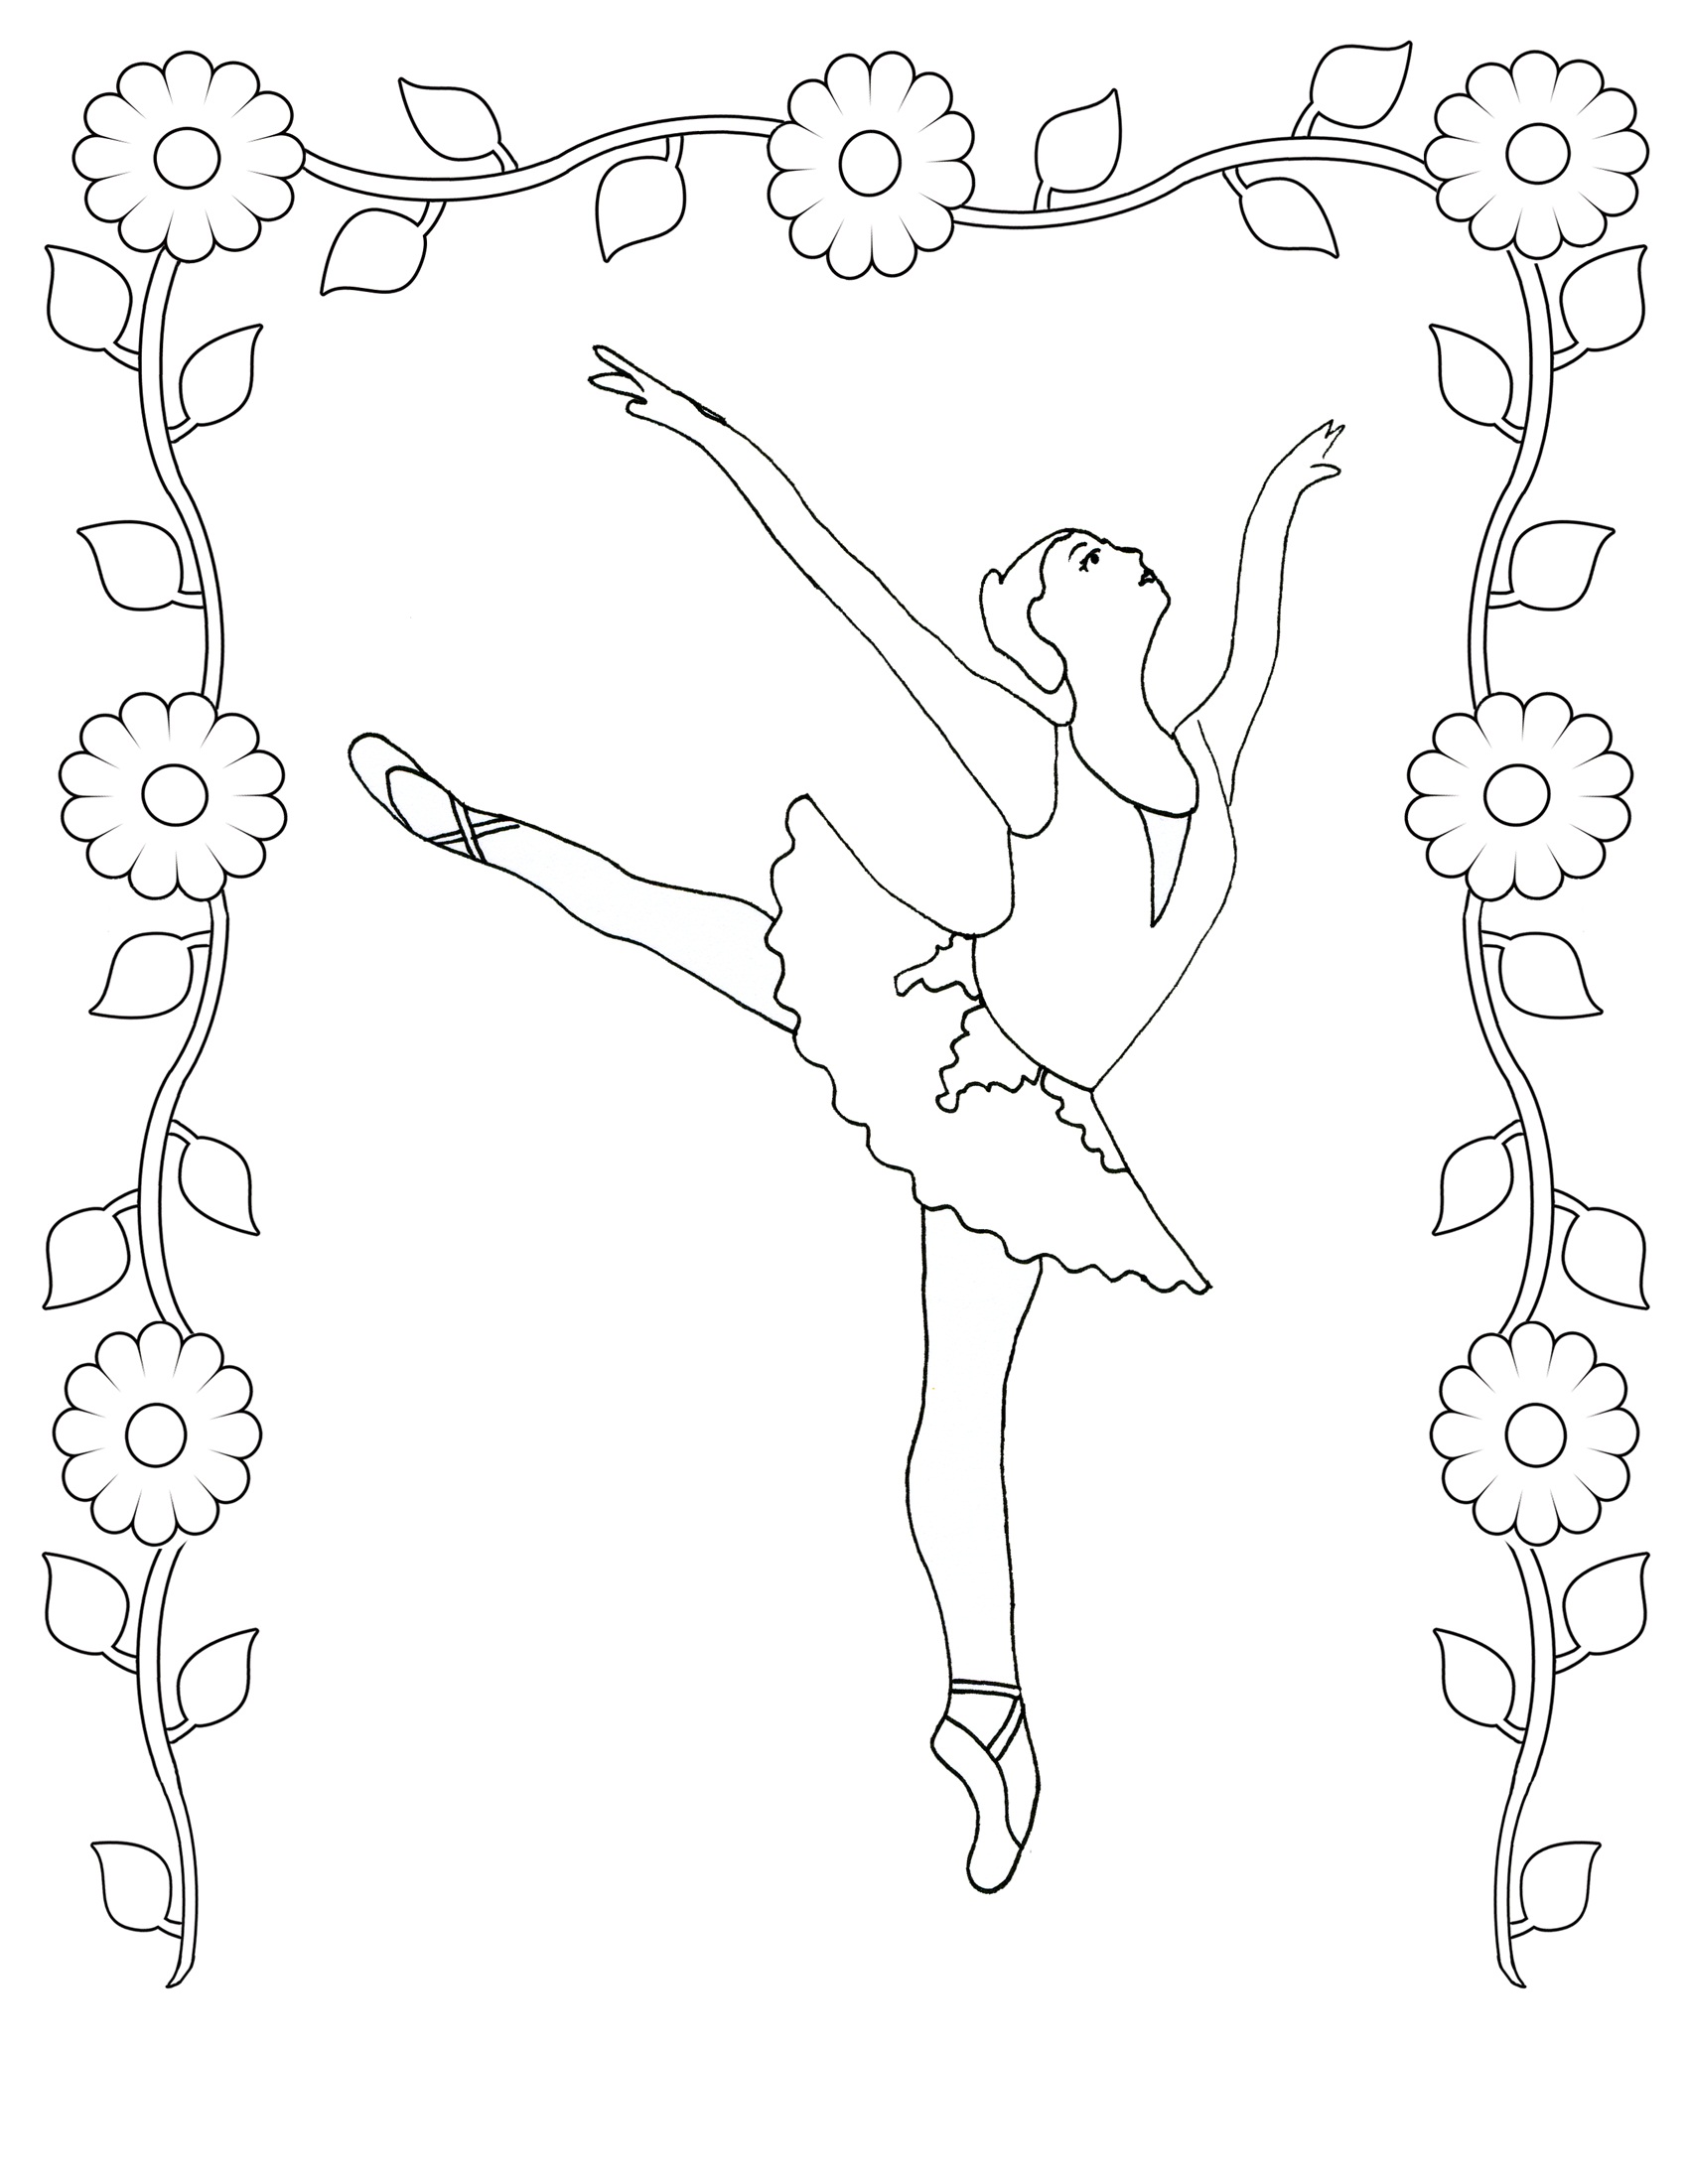 25 Free Ballerina Coloring Pages You Can Print From Home